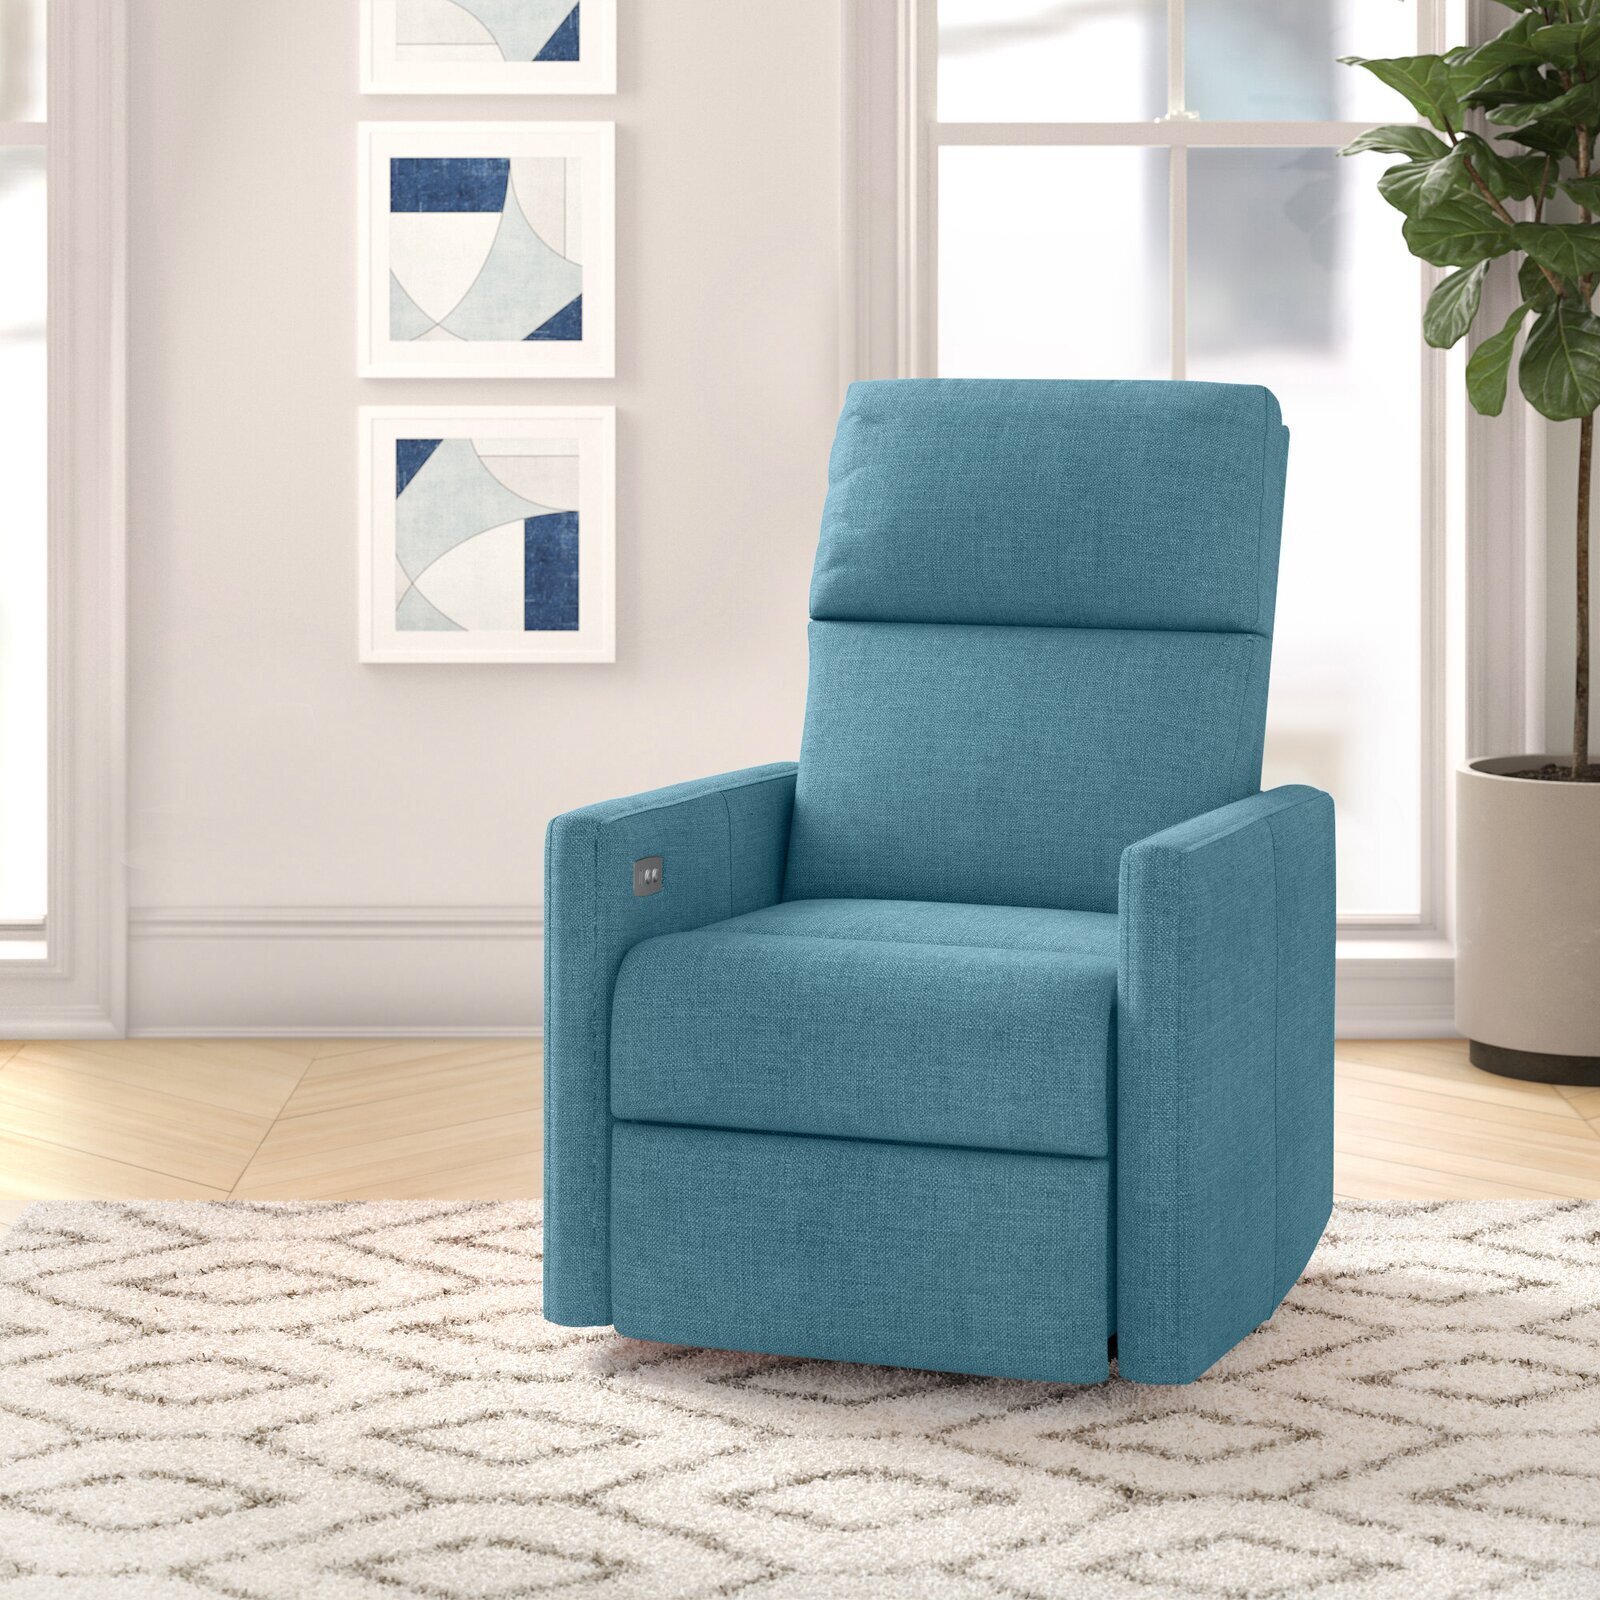 Simple Small Bedroom Recliner Chair